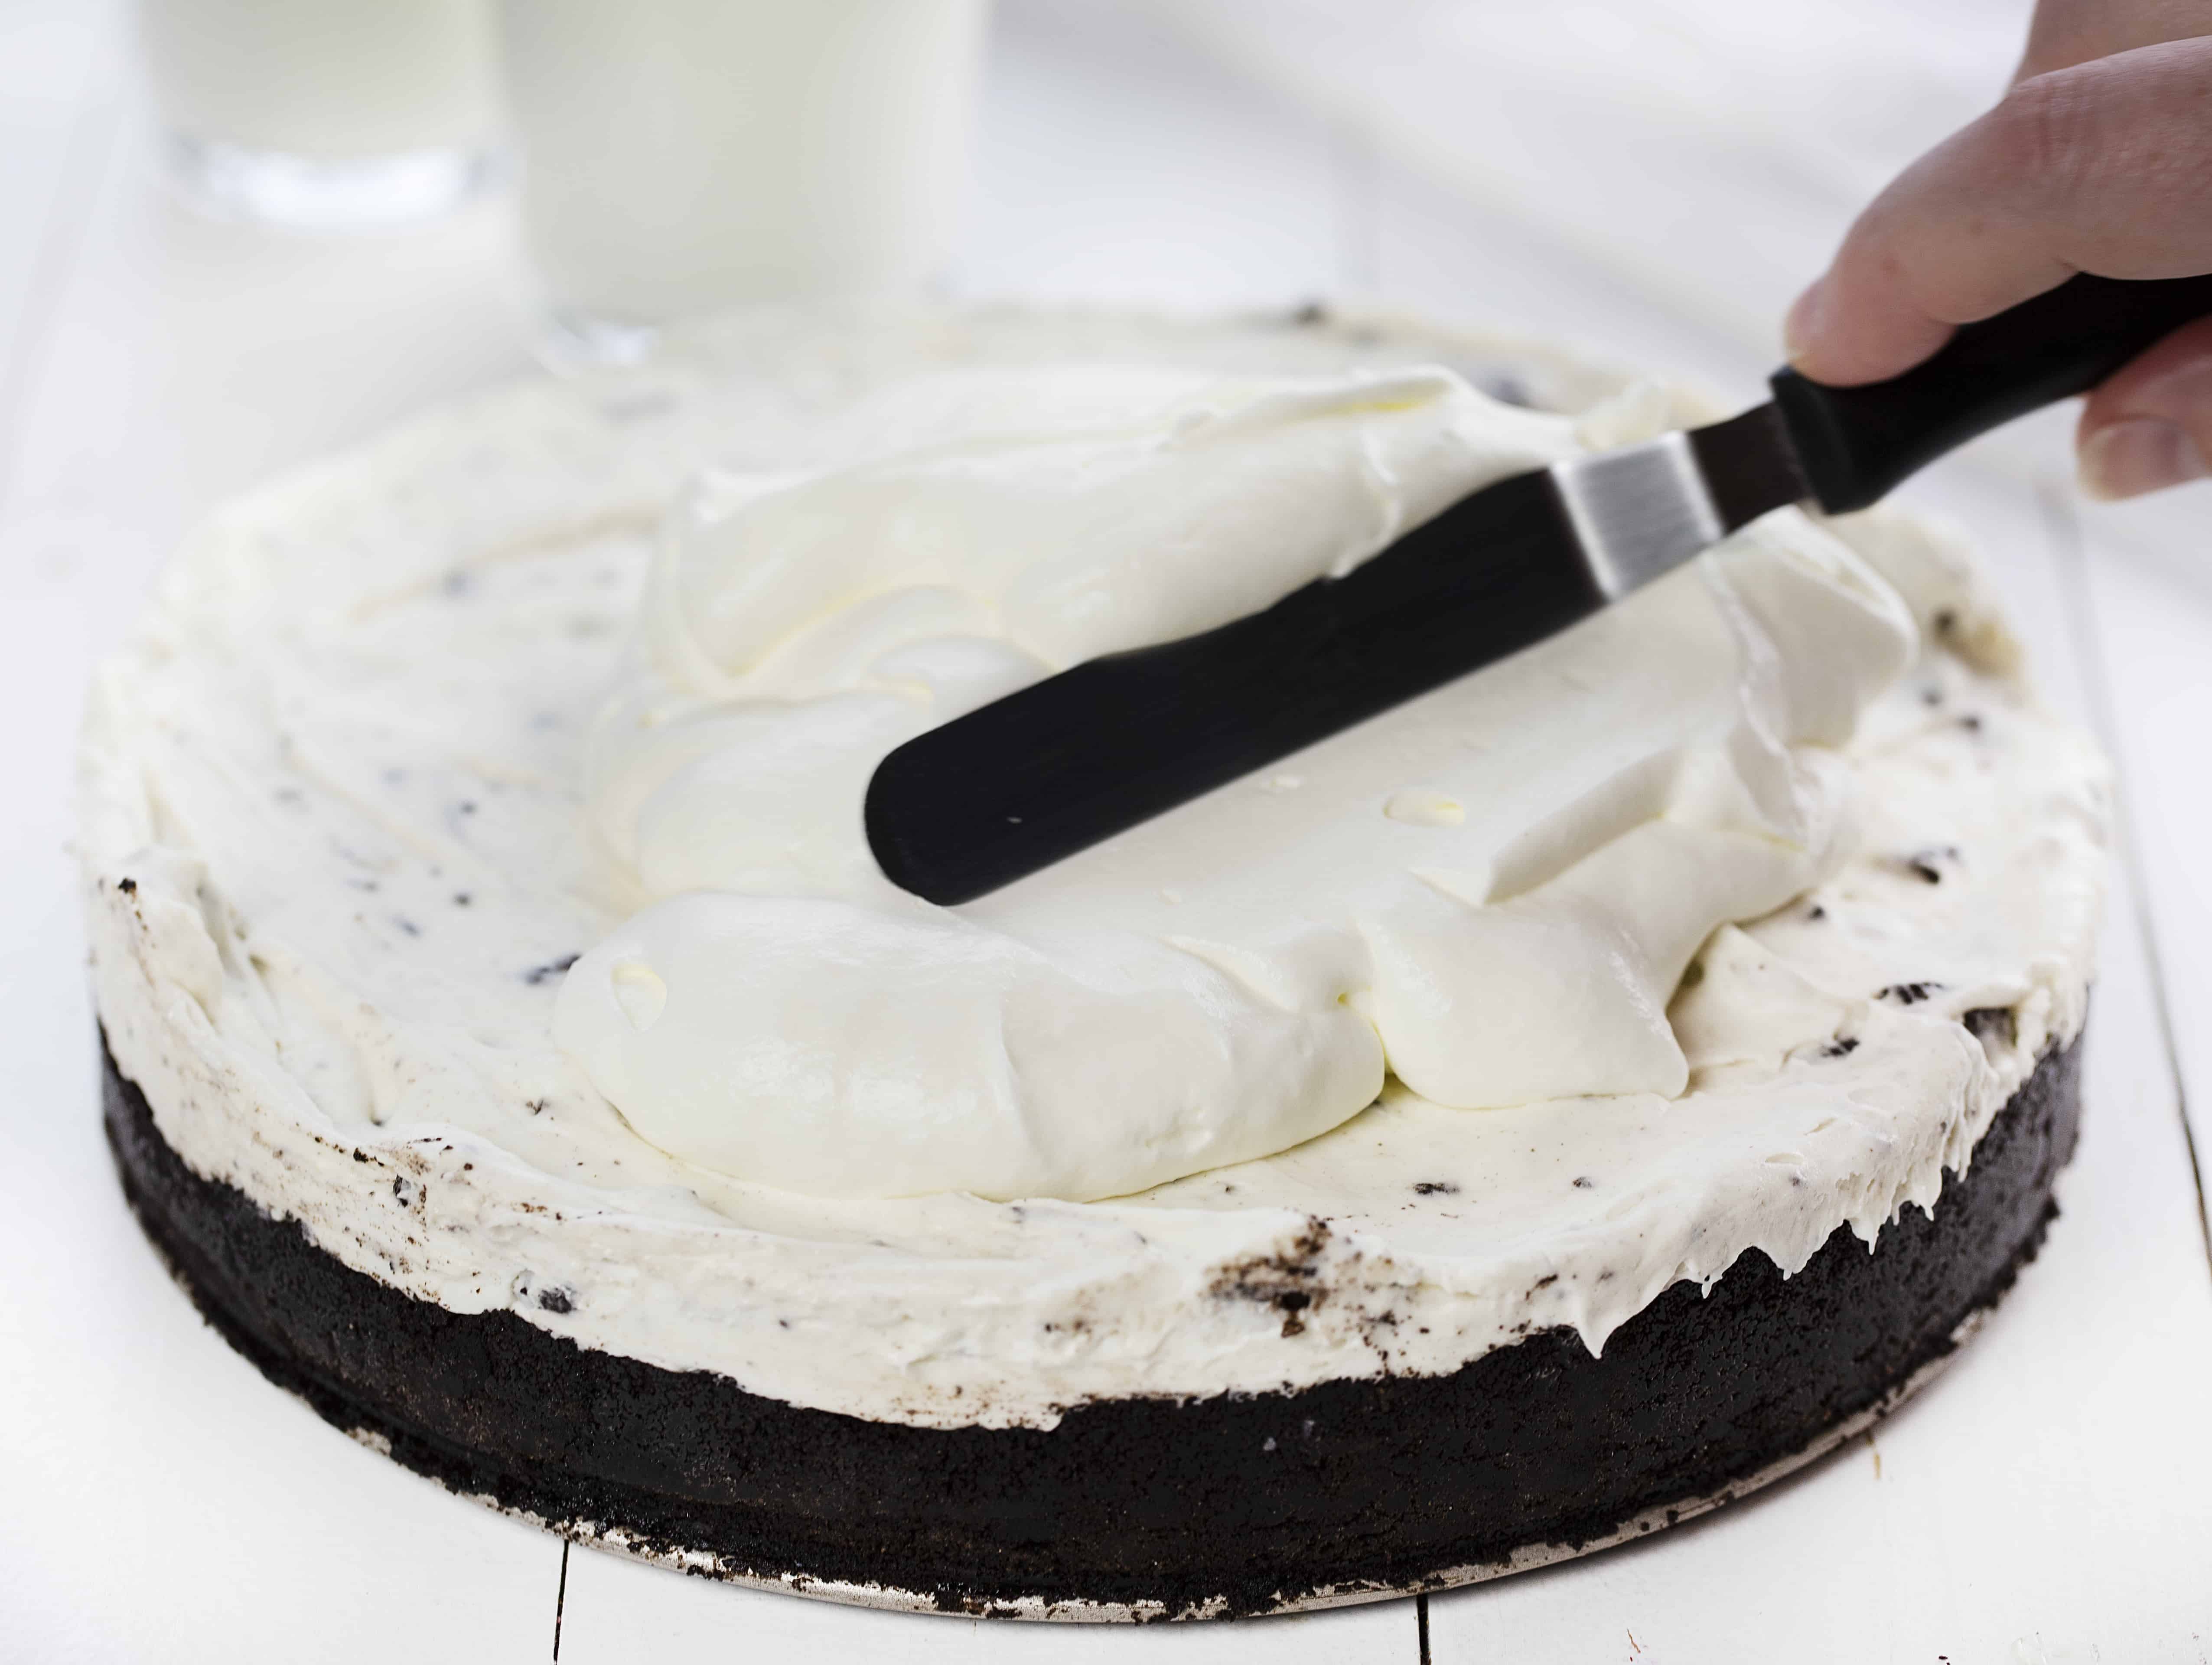 No Bake Oreo Cheesecake with Homemade Whipped Topping Being Spread on Top